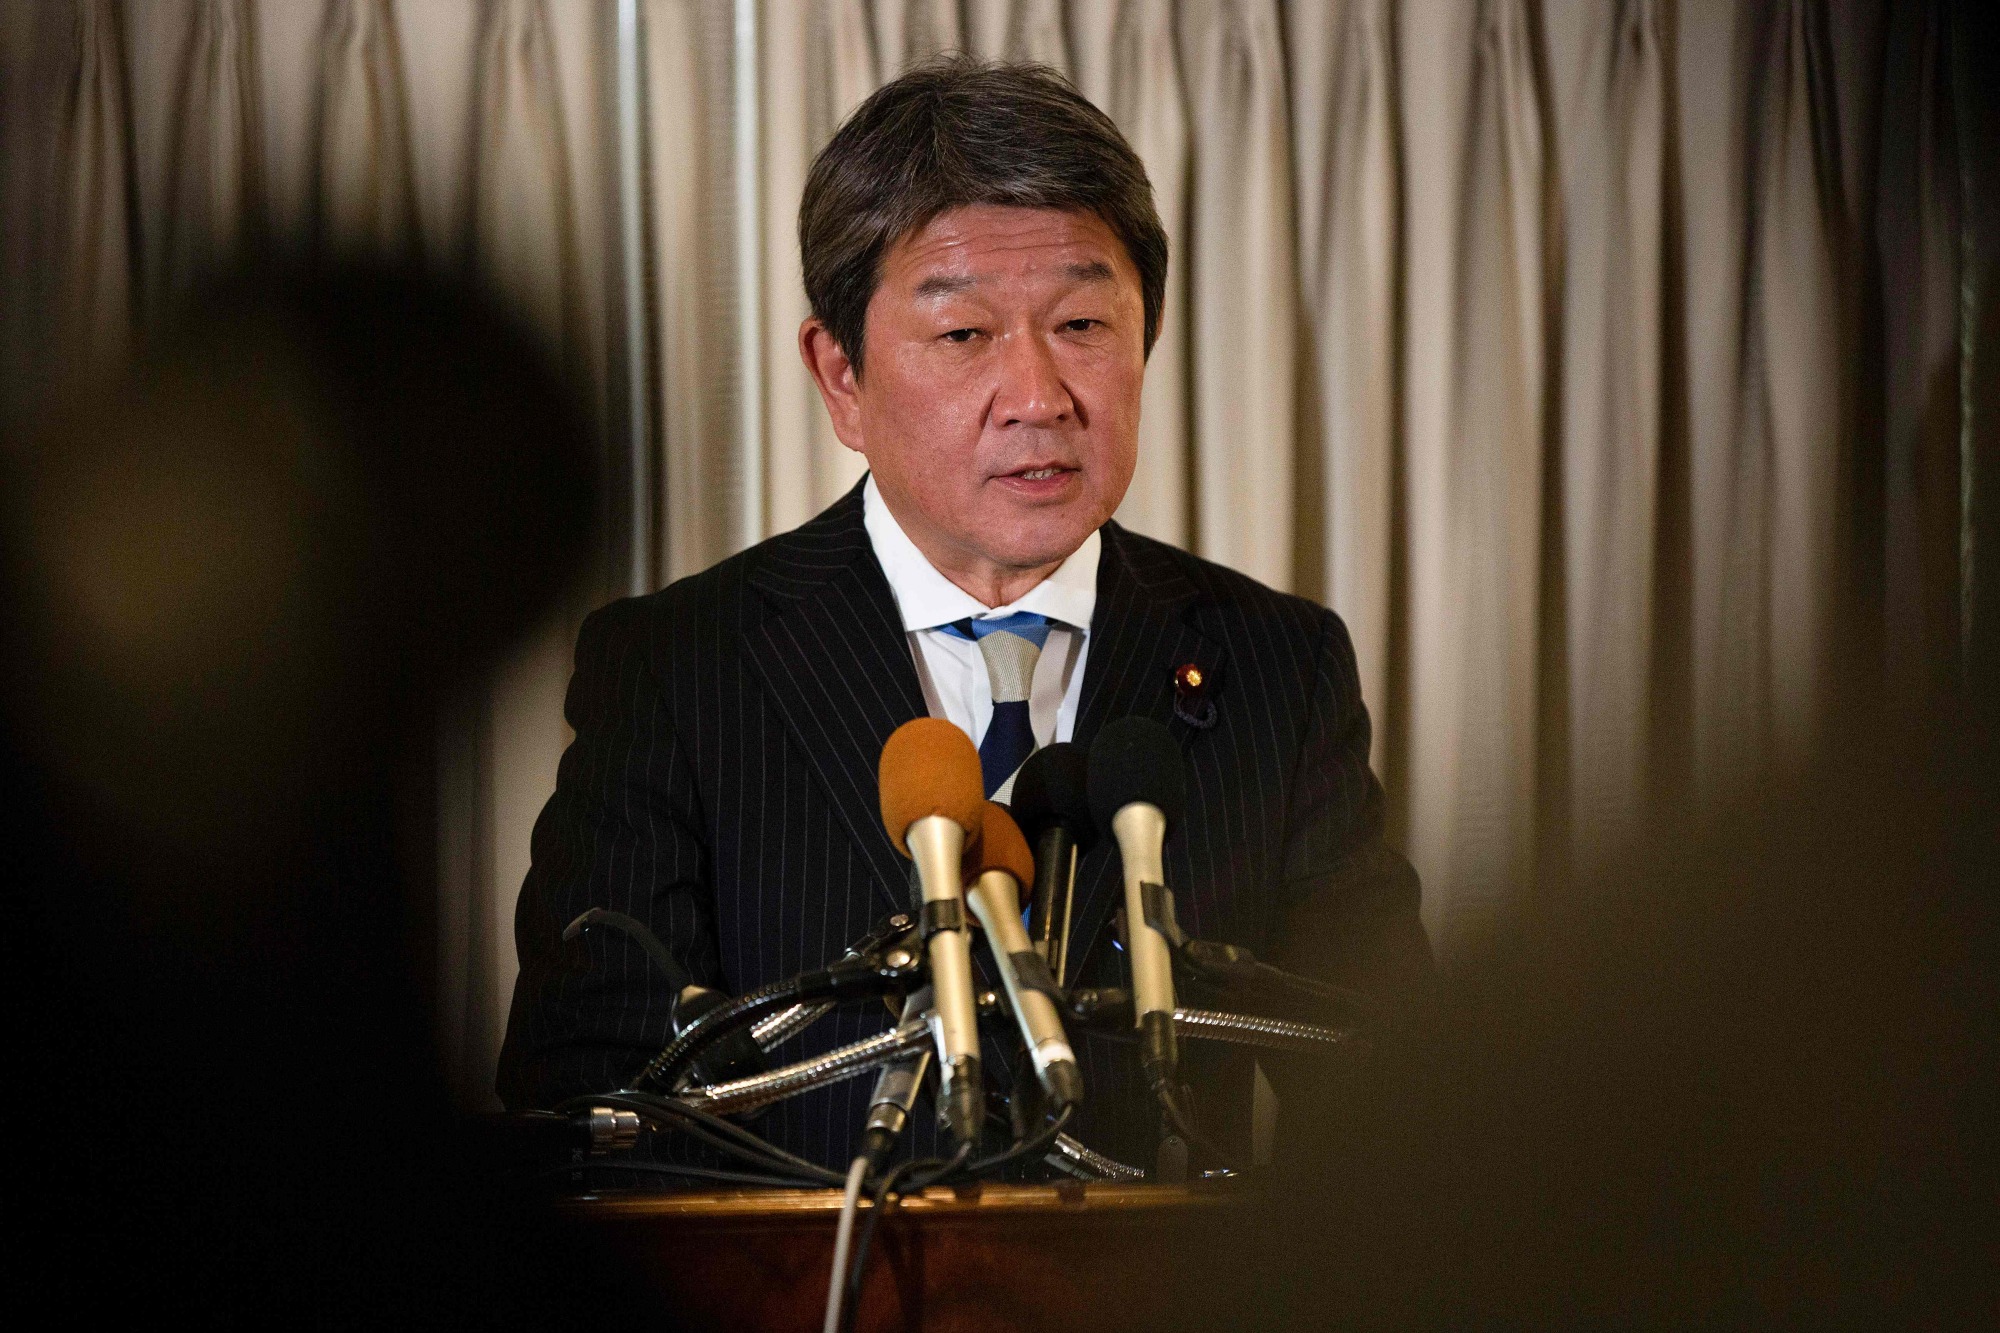 Economic revitalization minister Toshimitsu Motegi speaks during a news conference at a hotel in Washington on Friday. | AFP-JIJI